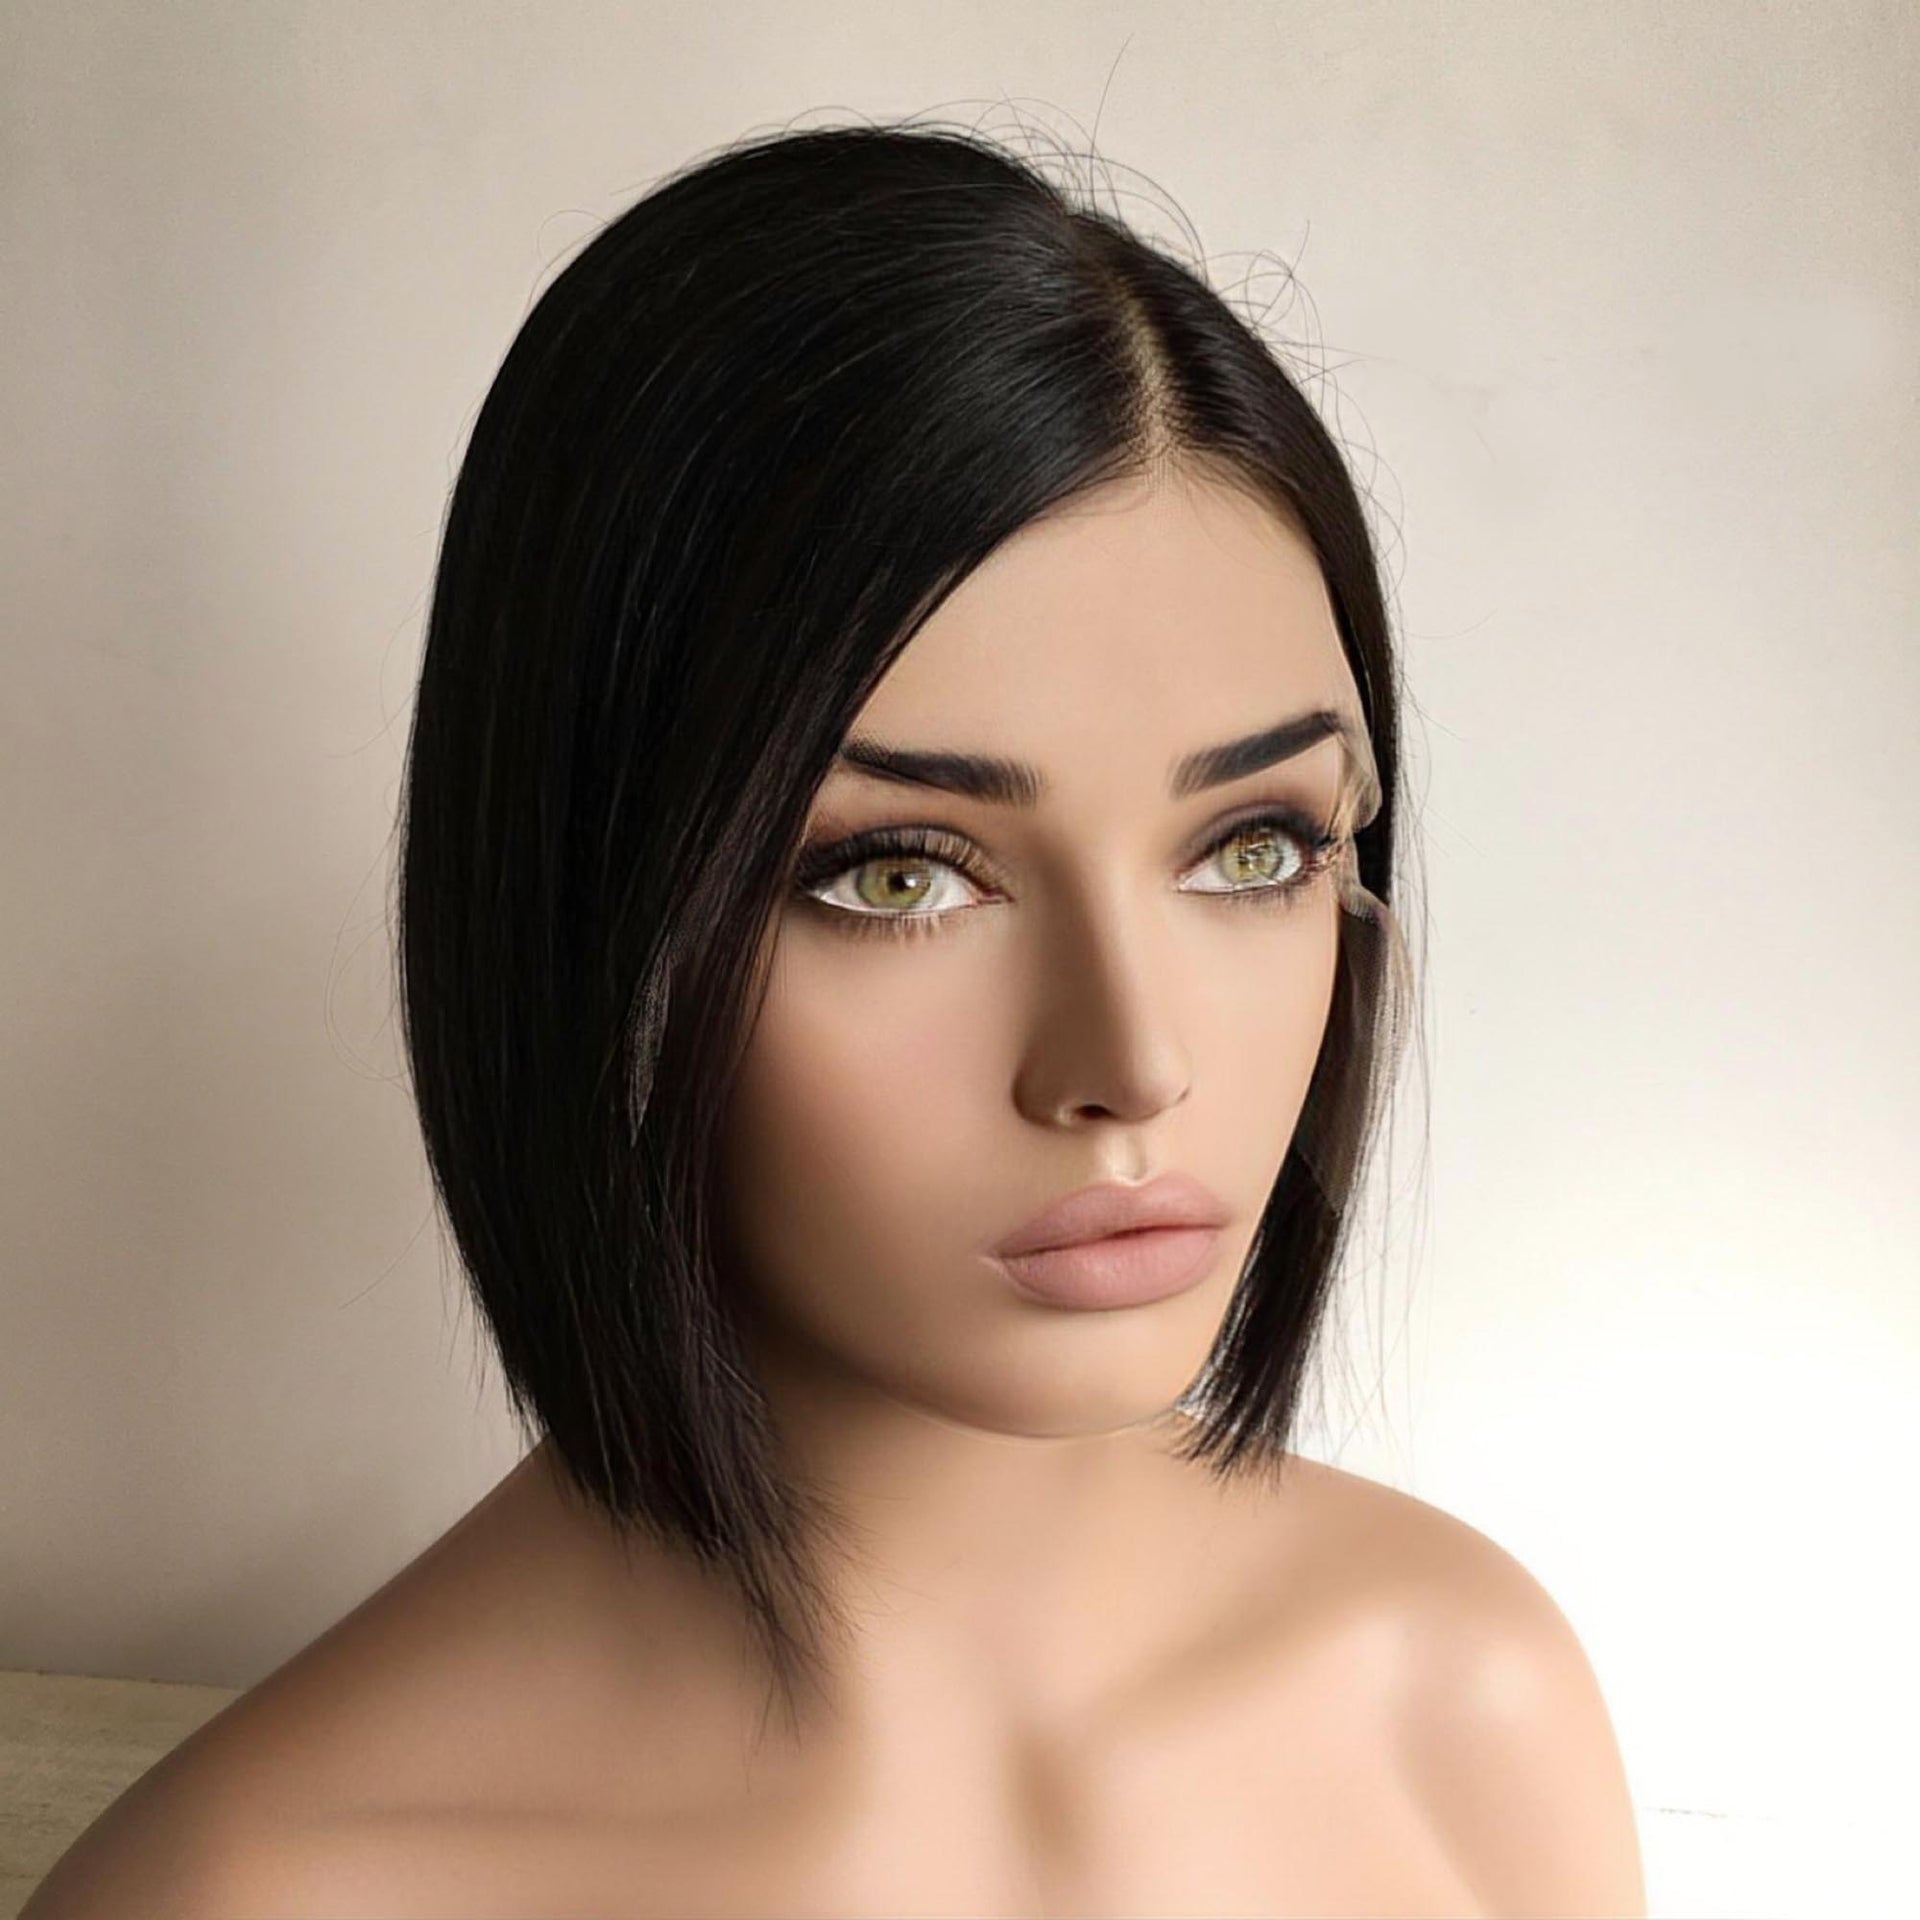 nevermindyrhead Women Natural Black Human Hair 13X6 Lace Front Short Bob Straight Side Part Wig 8 Inches